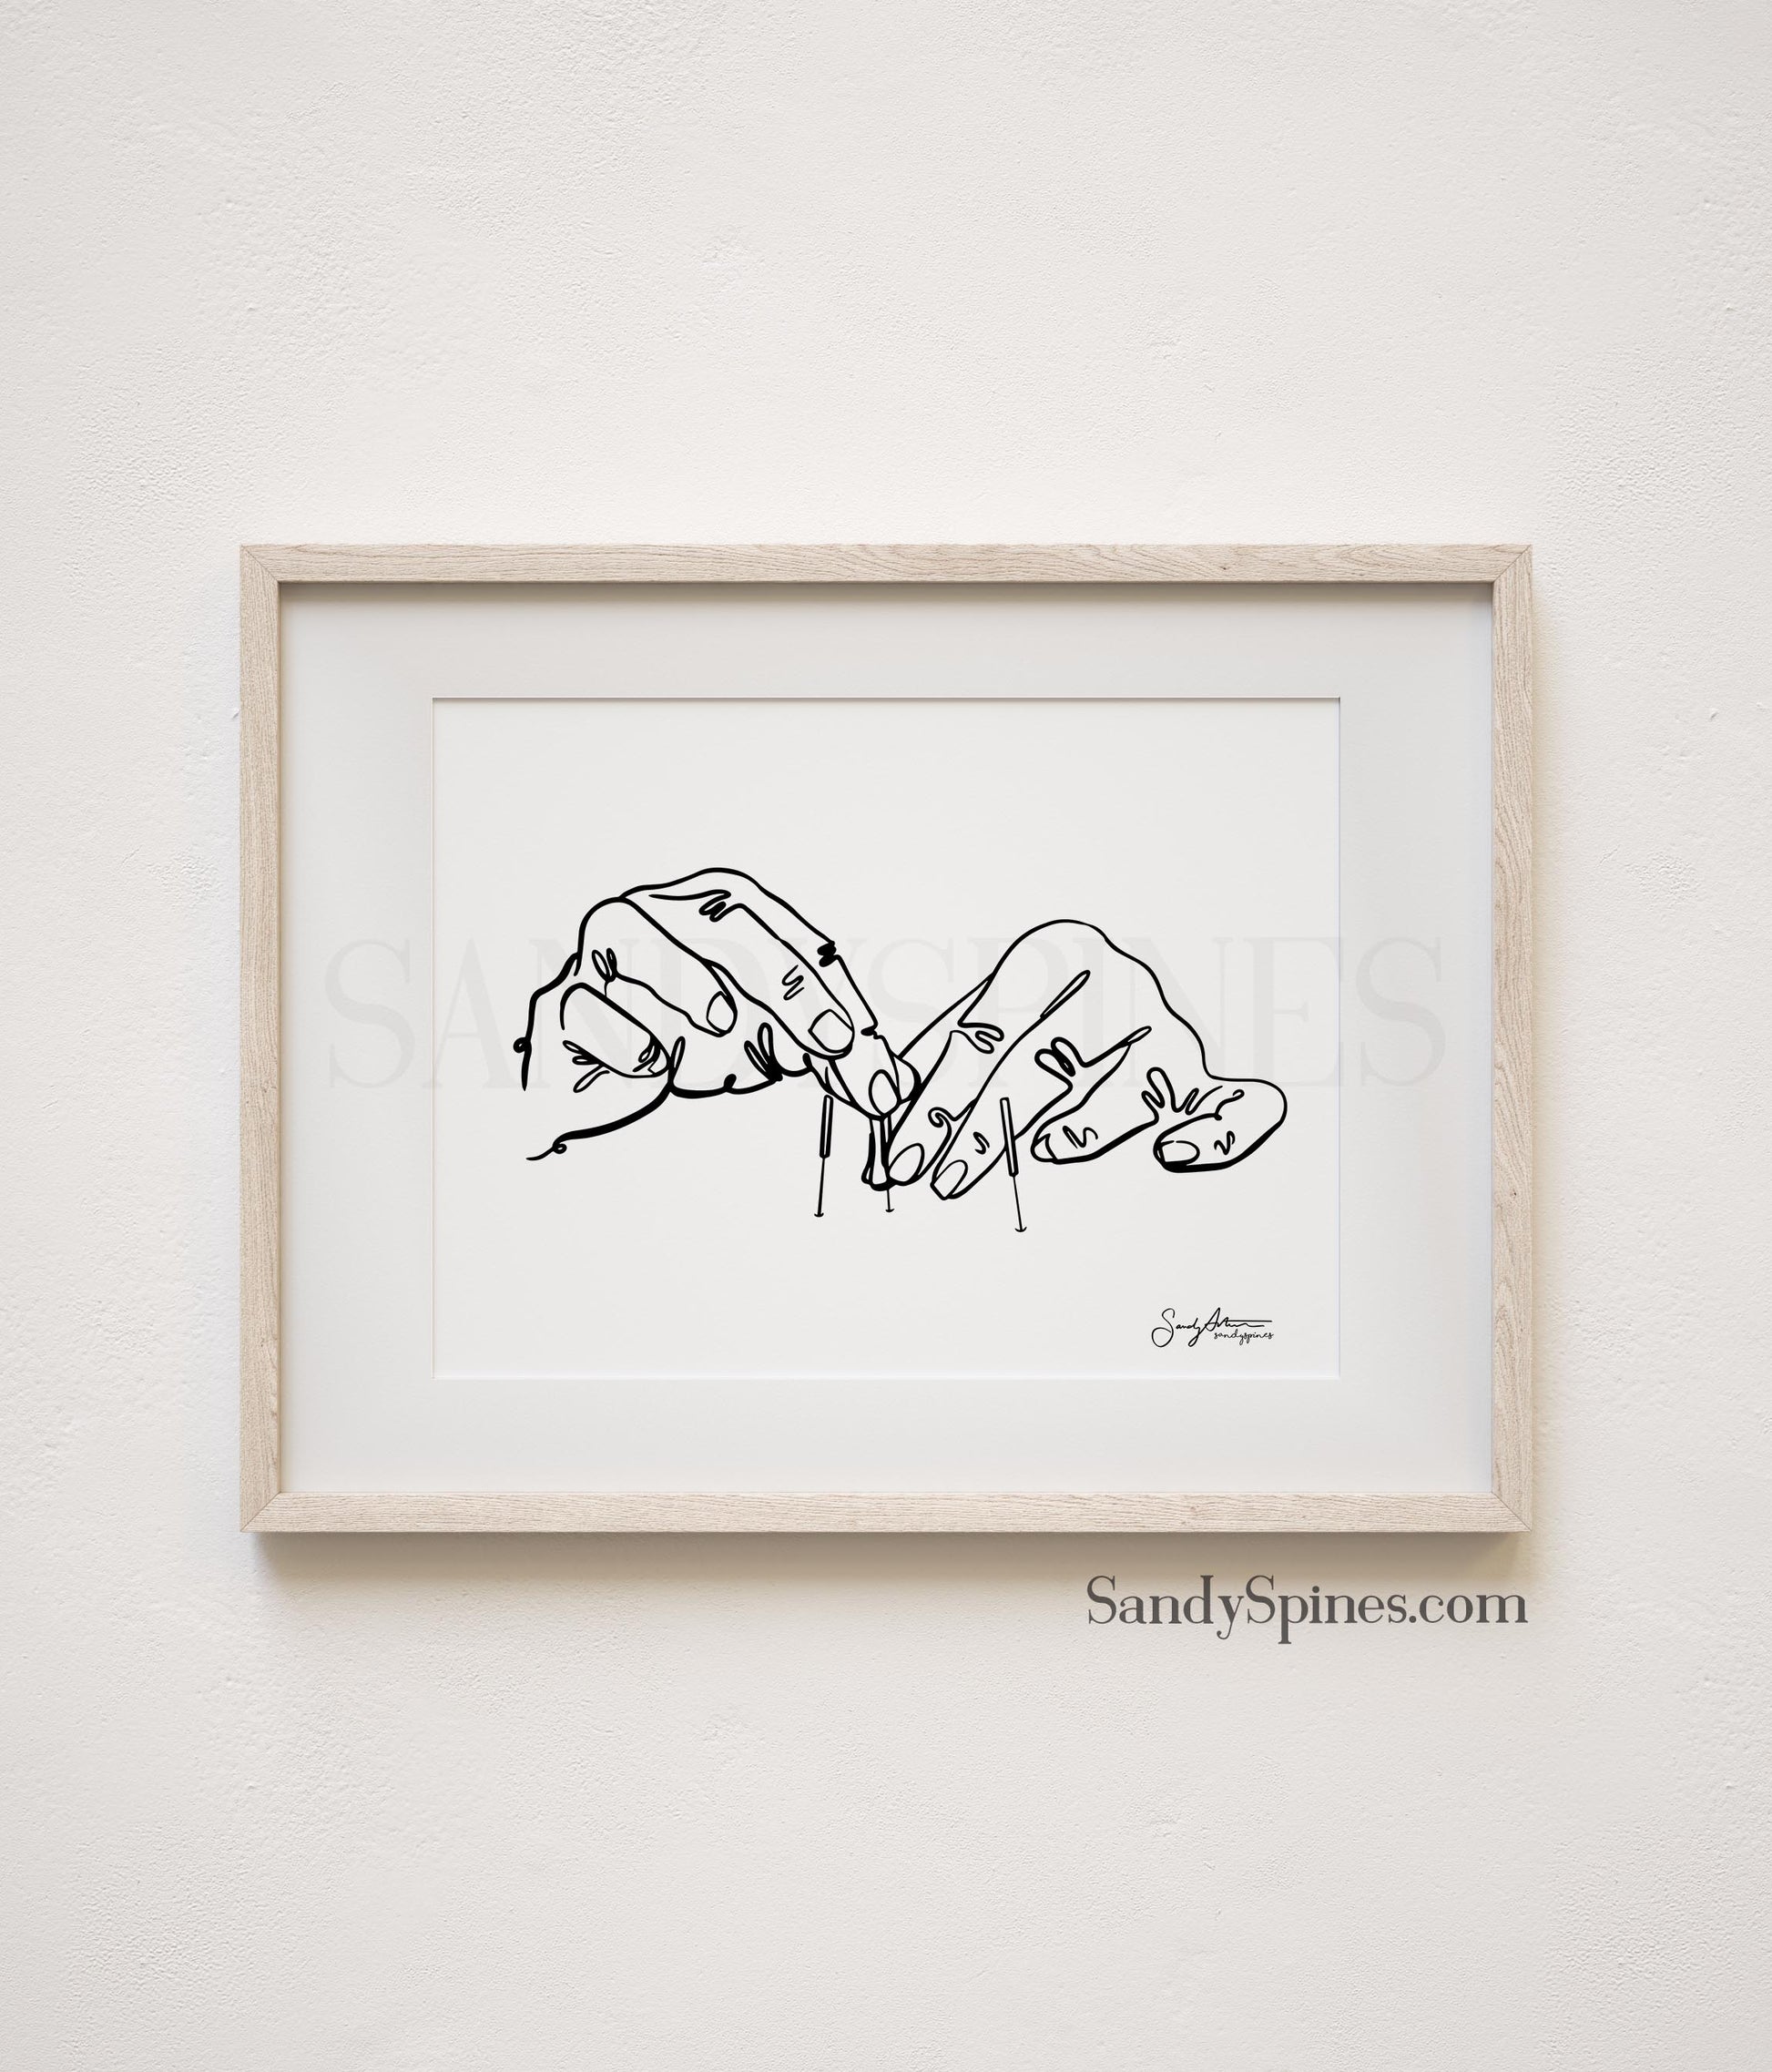 Original Artwork - Black and White Illustration of two hands placing acupuncture needles